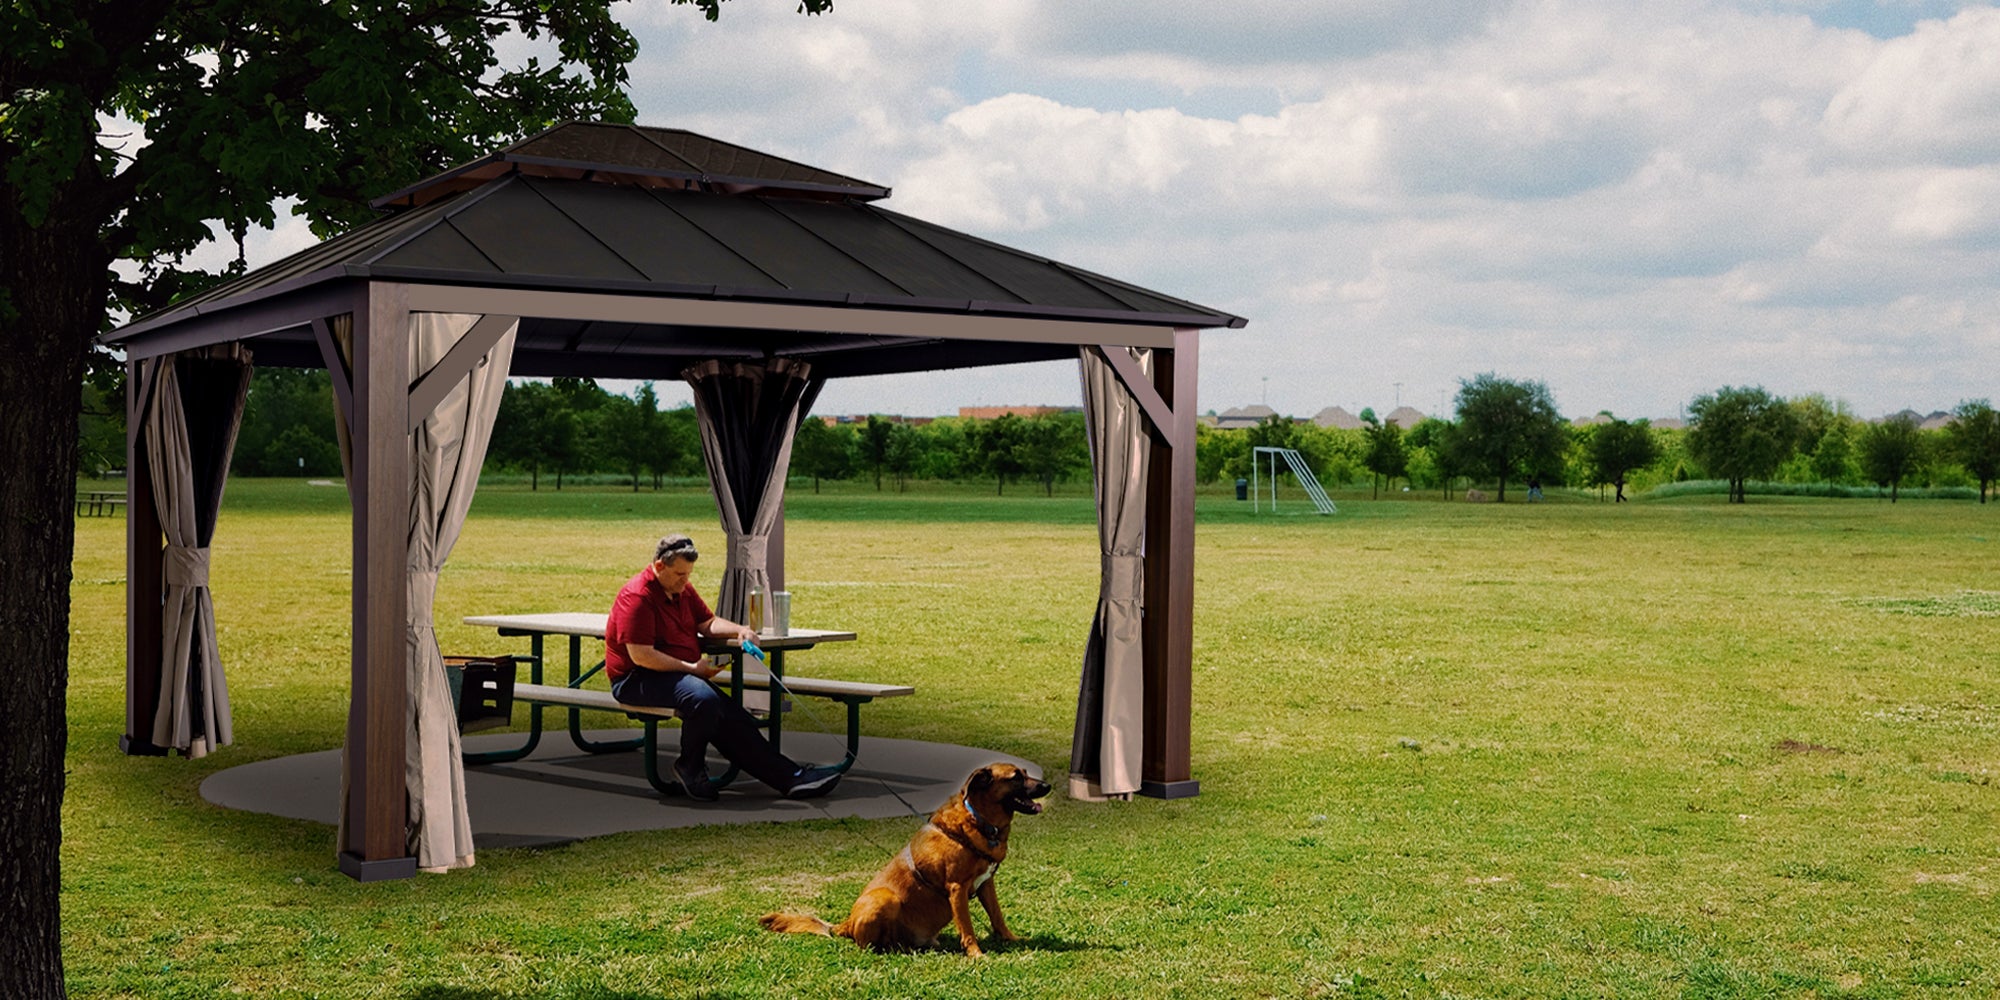 What Can You Use a Gazebo For?